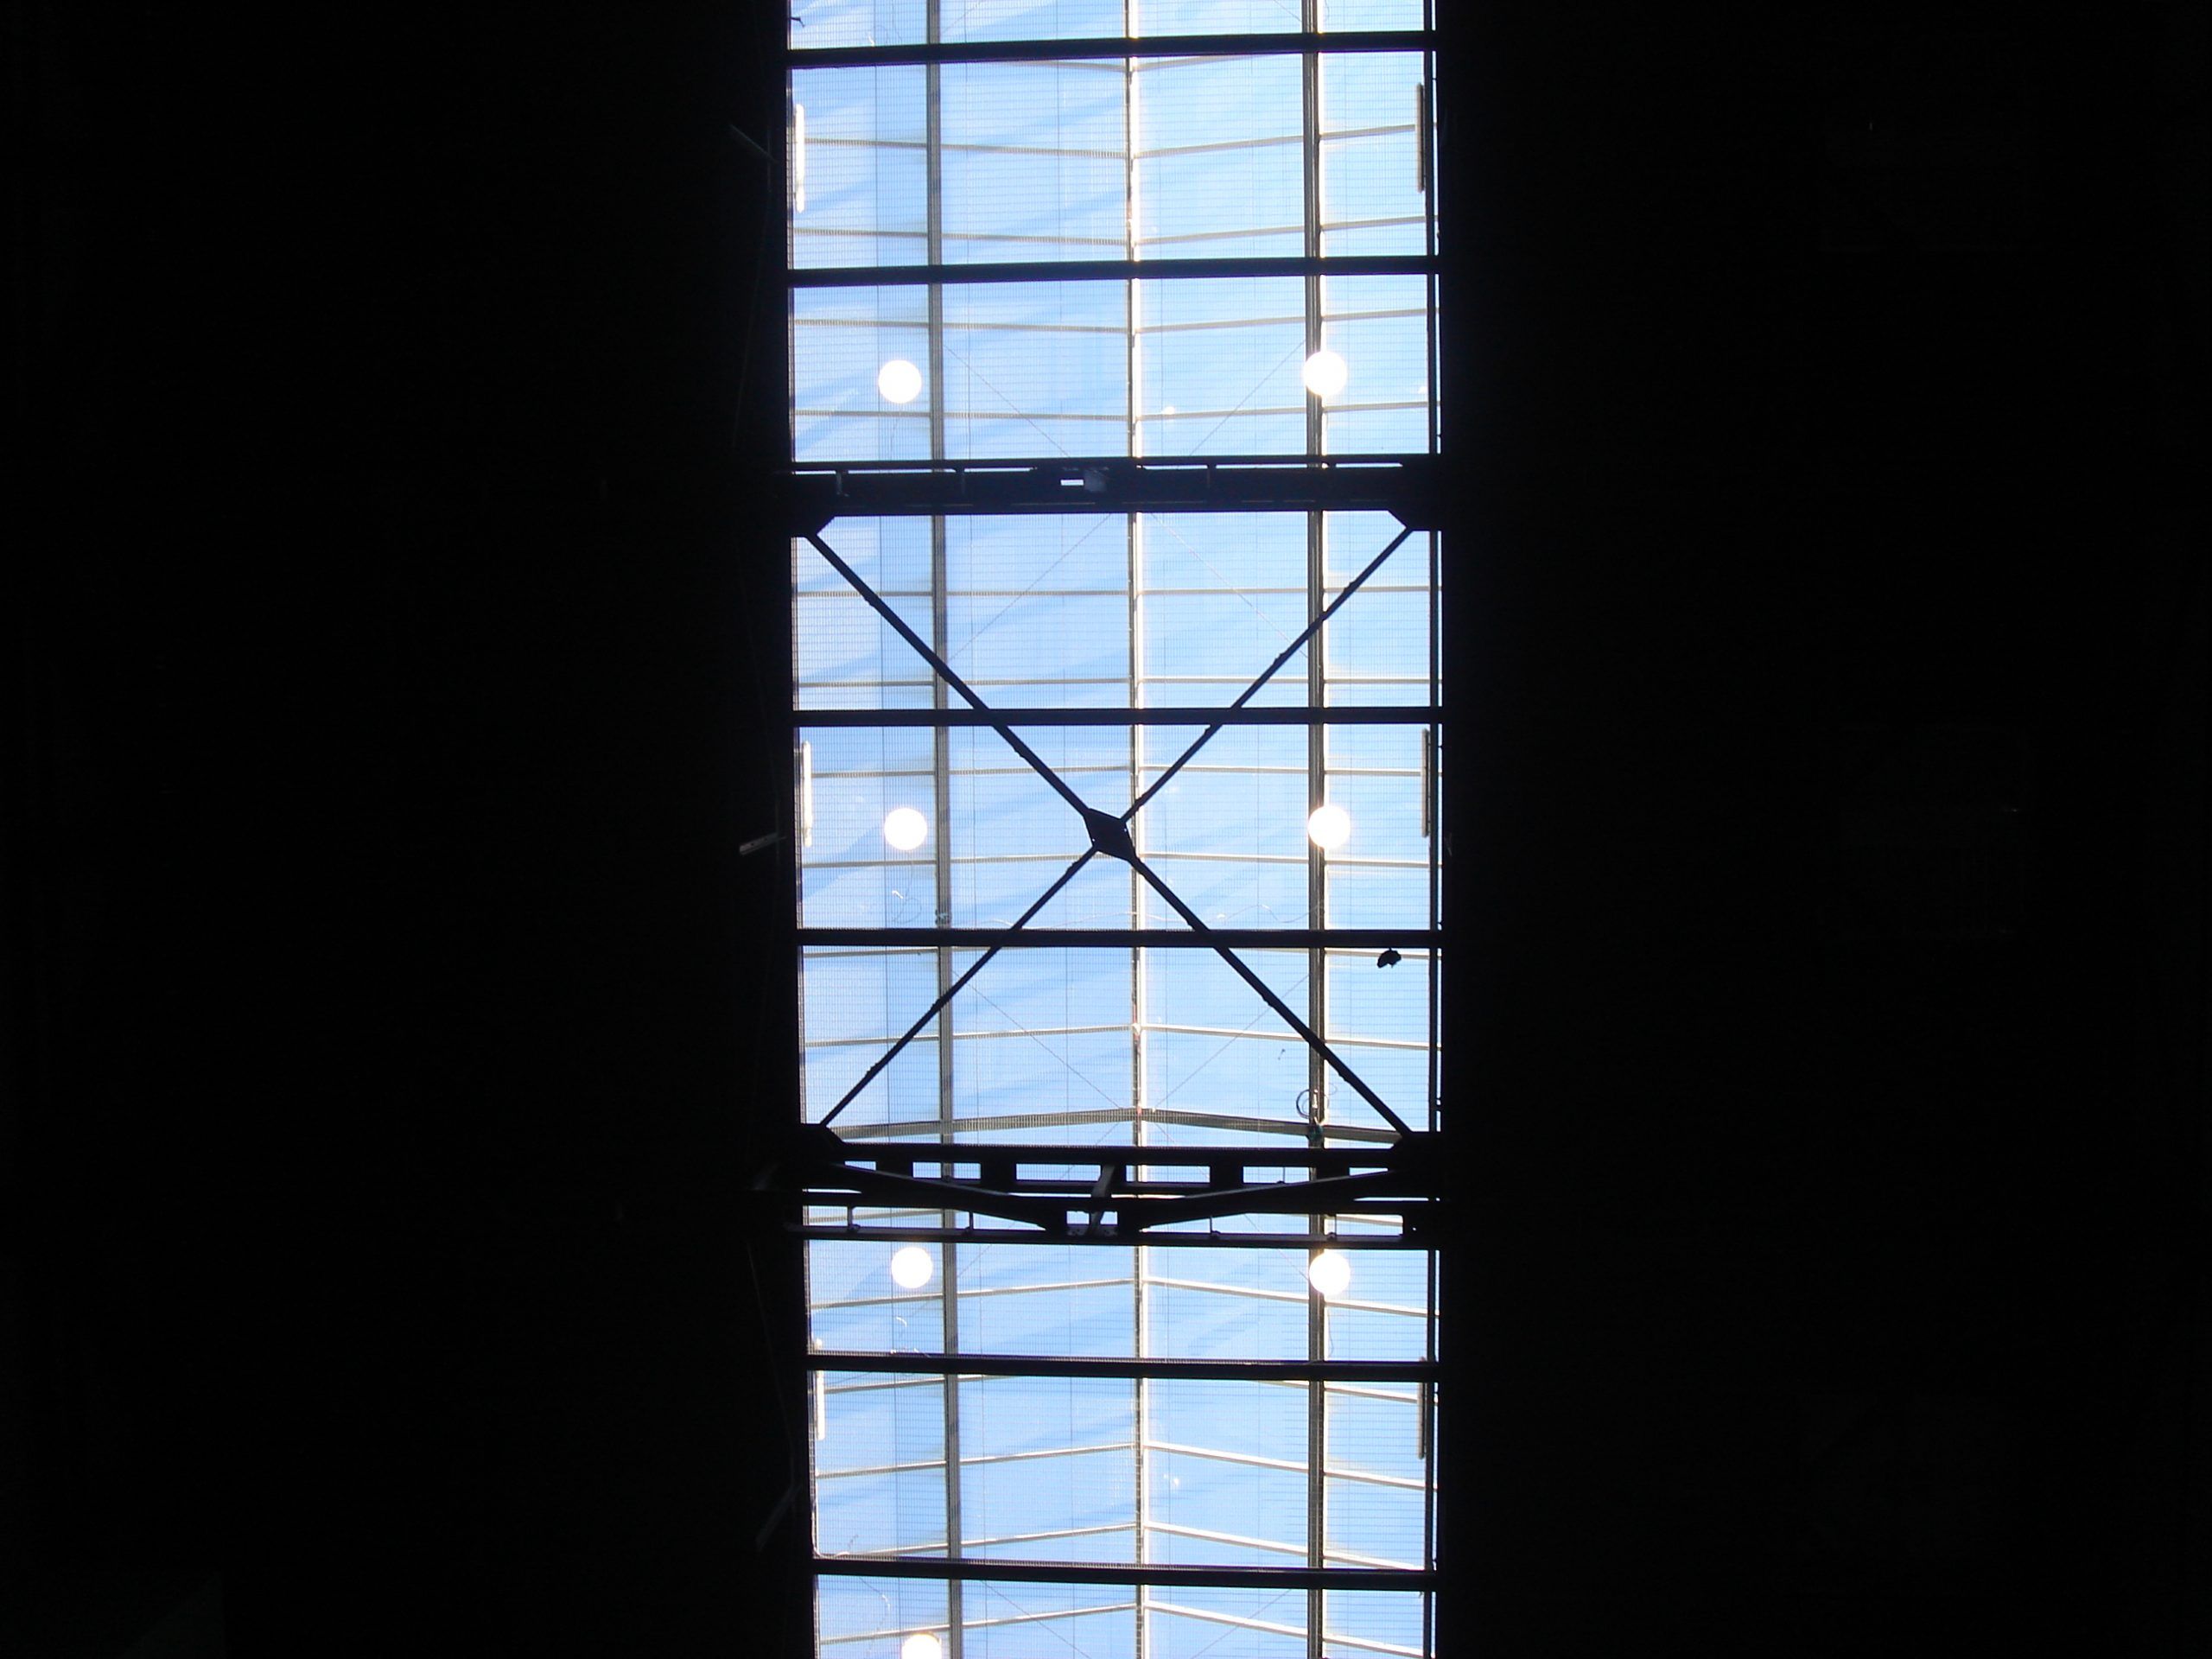 A skylight in the high ceiling of an industrial building, crisscrossed with girders.